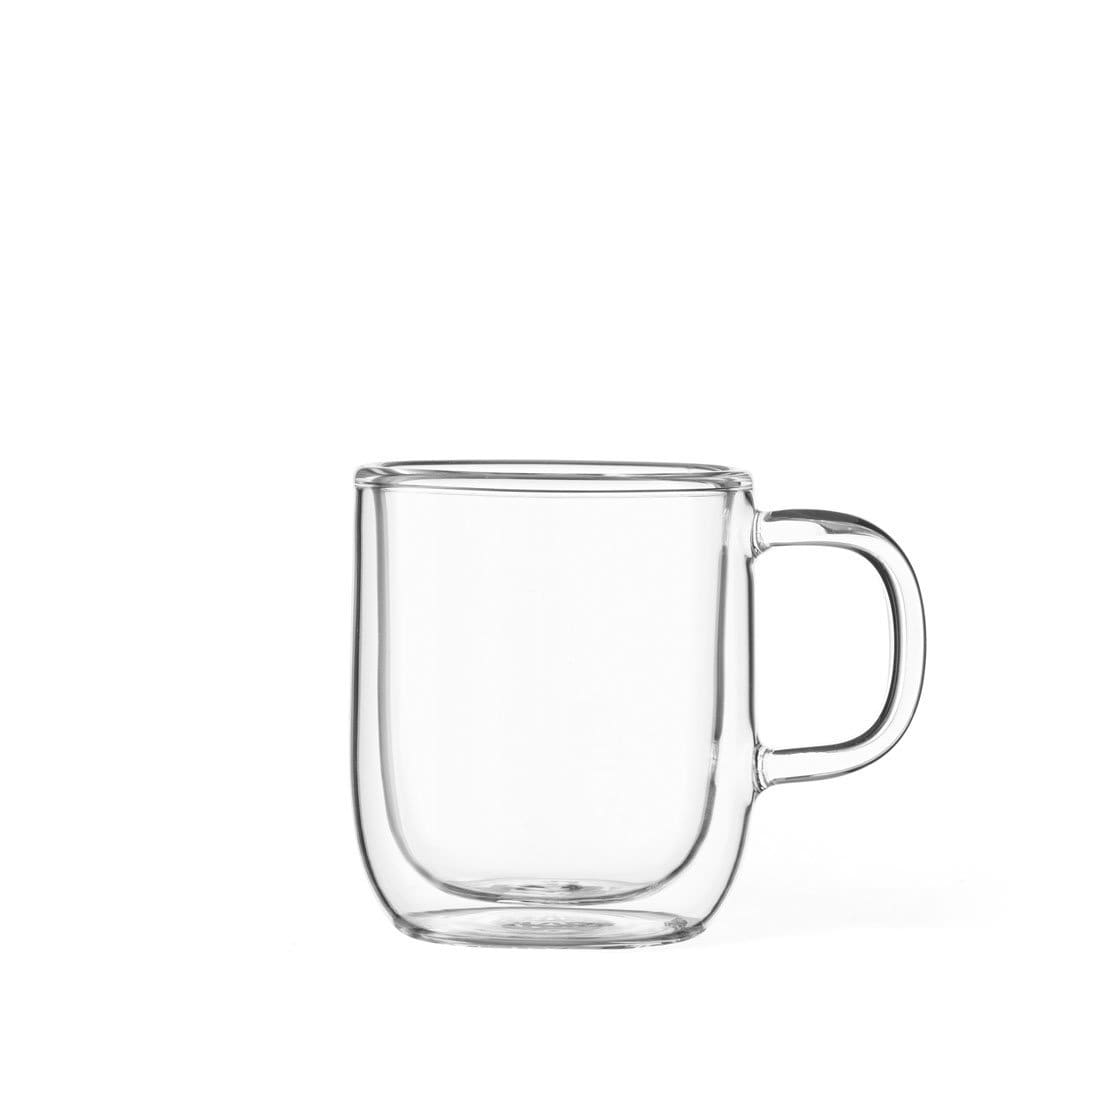 Classic Double Wall Glass Cup - Set Of 2, 300ml - VIVA